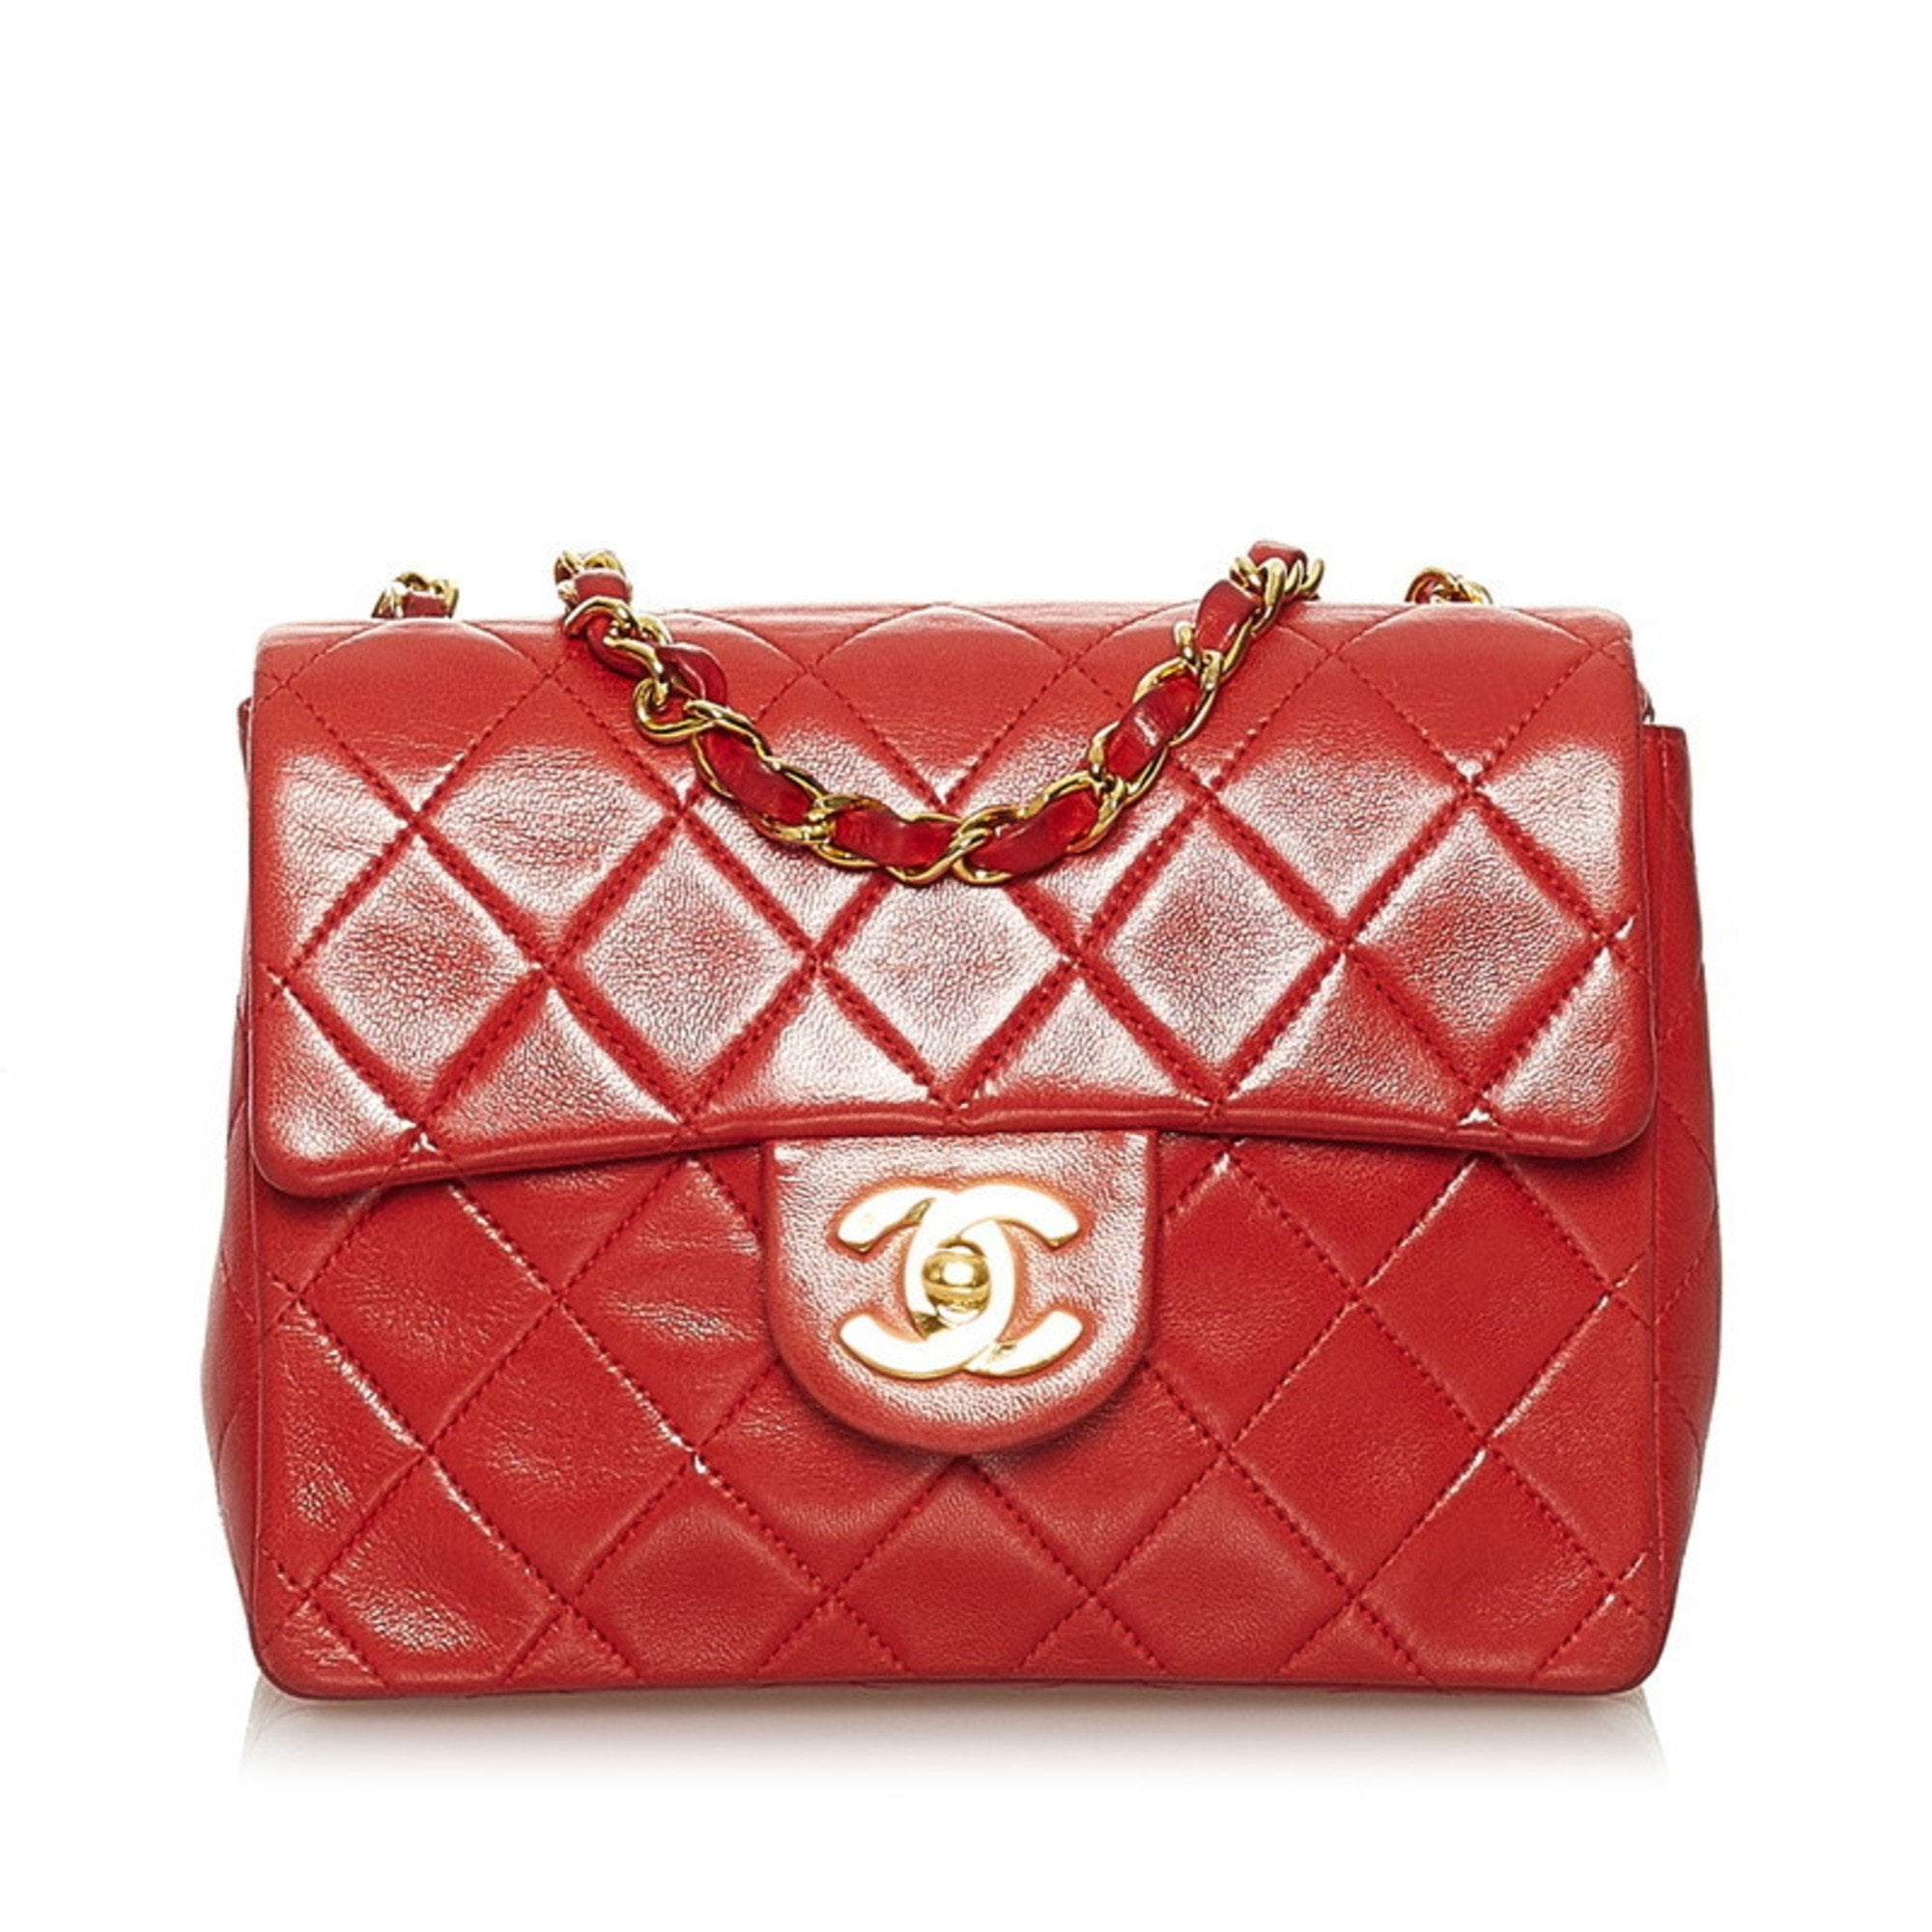 CHANEL VINTAGE CC TURNLOCK RED QUILTED SATIN GOLD CHAIN SHOULDER   CROSSBODY CAMERA BAG WITH TASSEL